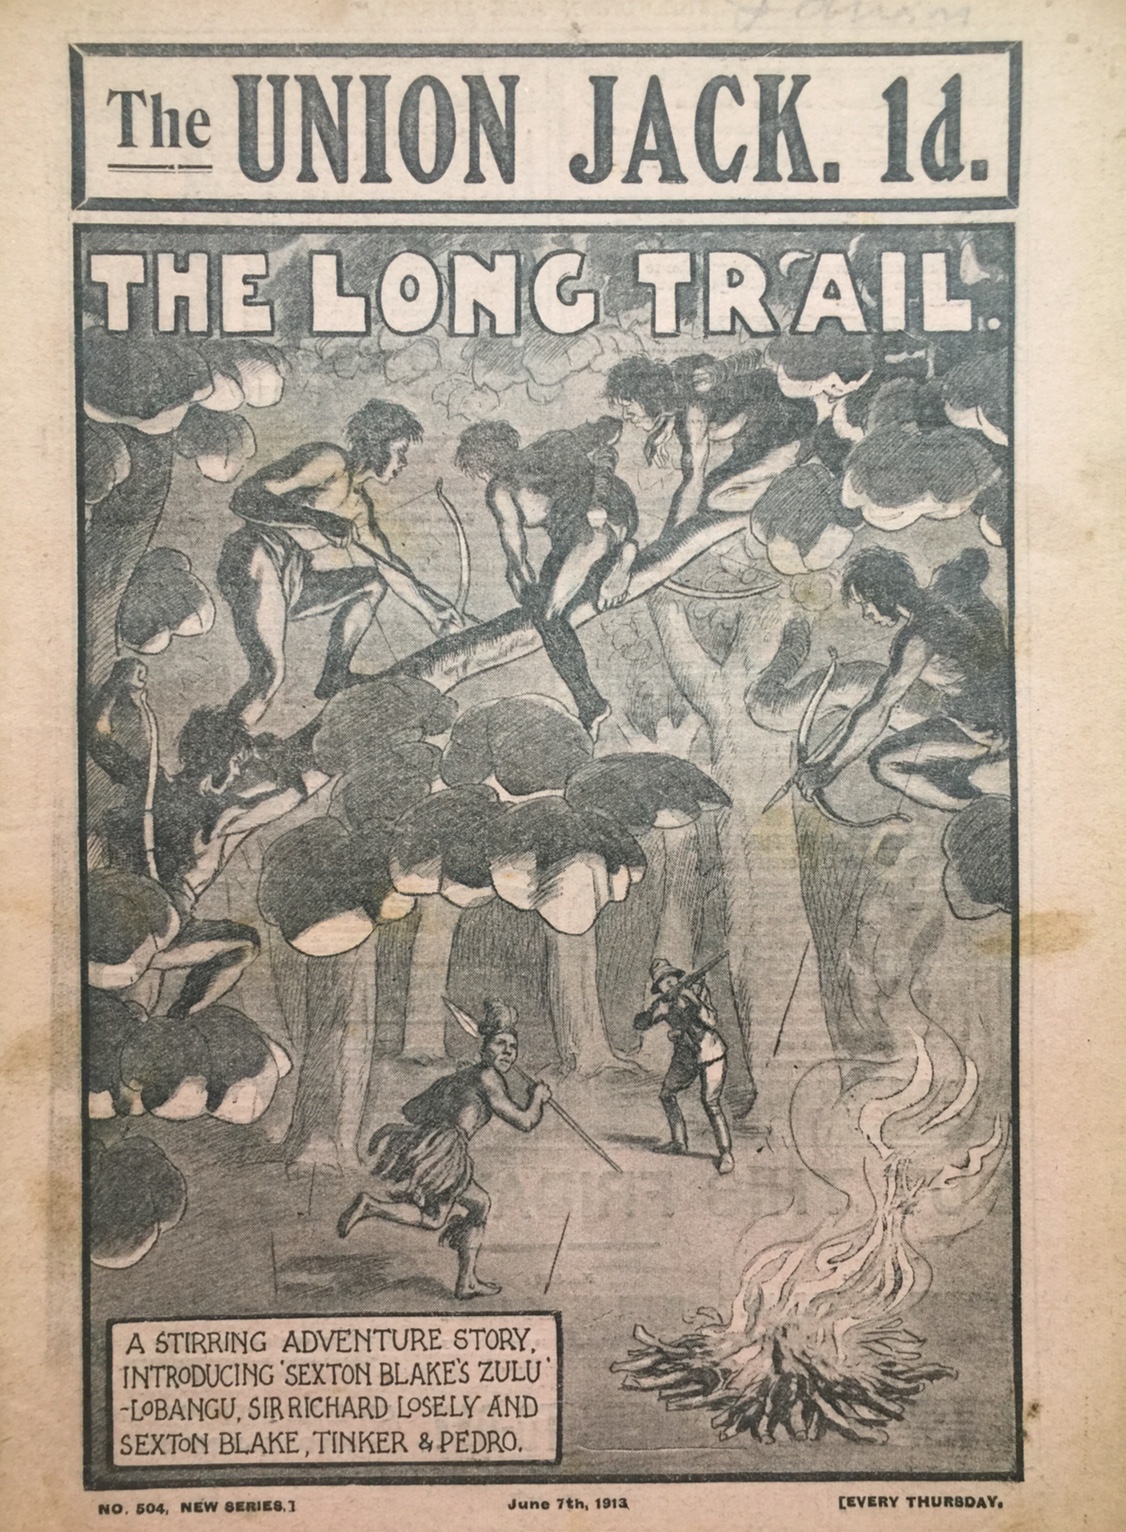 THE LONG TRAIL